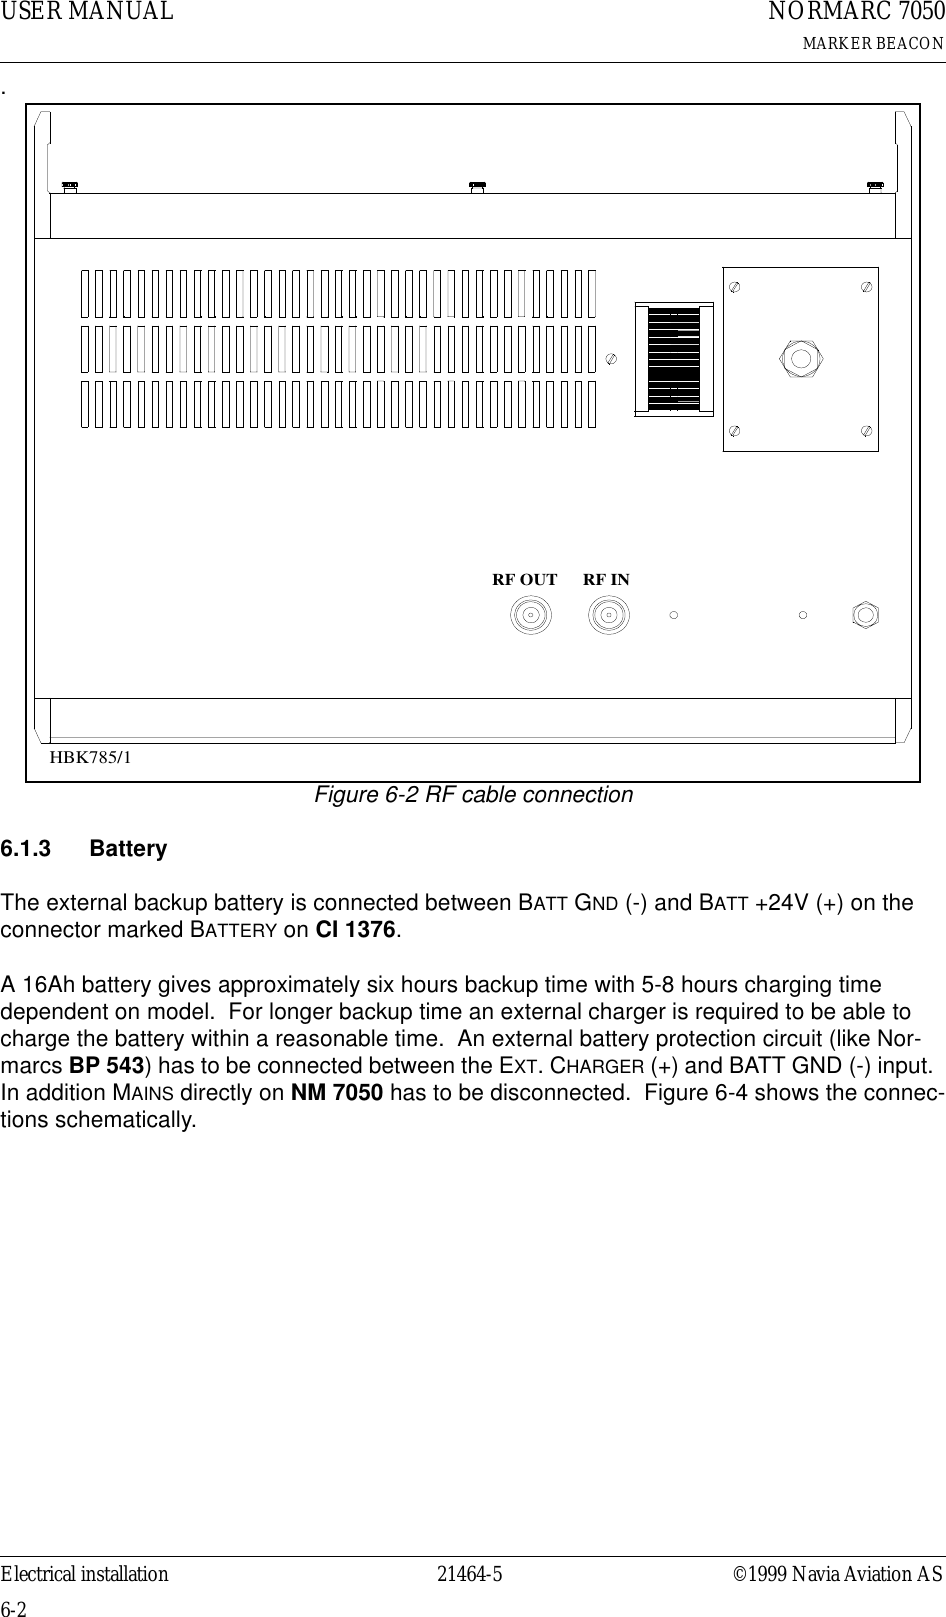 USER MANUAL6-221464-5NORMARC 7050MARKER BEACONElectrical installation ©1999 Navia Aviation AS.Figure 6-2 RF cable connection6.1.3 BatteryThe external backup battery is connected between BATT GND (-) and BATT +24V (+) on the connector marked BATTERY on CI 1376.  A 16Ah battery gives approximately six hours backup time with 5-8 hours charging time dependent on model.  For longer backup time an external charger is required to be able to charge the battery within a reasonable time.  An external battery protection circuit (like Nor-marcs BP 543) has to be connected between the EXT. CHARGER (+) and BATT GND (-) input.  In addition MAINS directly on NM 7050 has to be disconnected.  Figure 6-4 shows the connec-tions schematically.RF OUT RF INHBK785/1